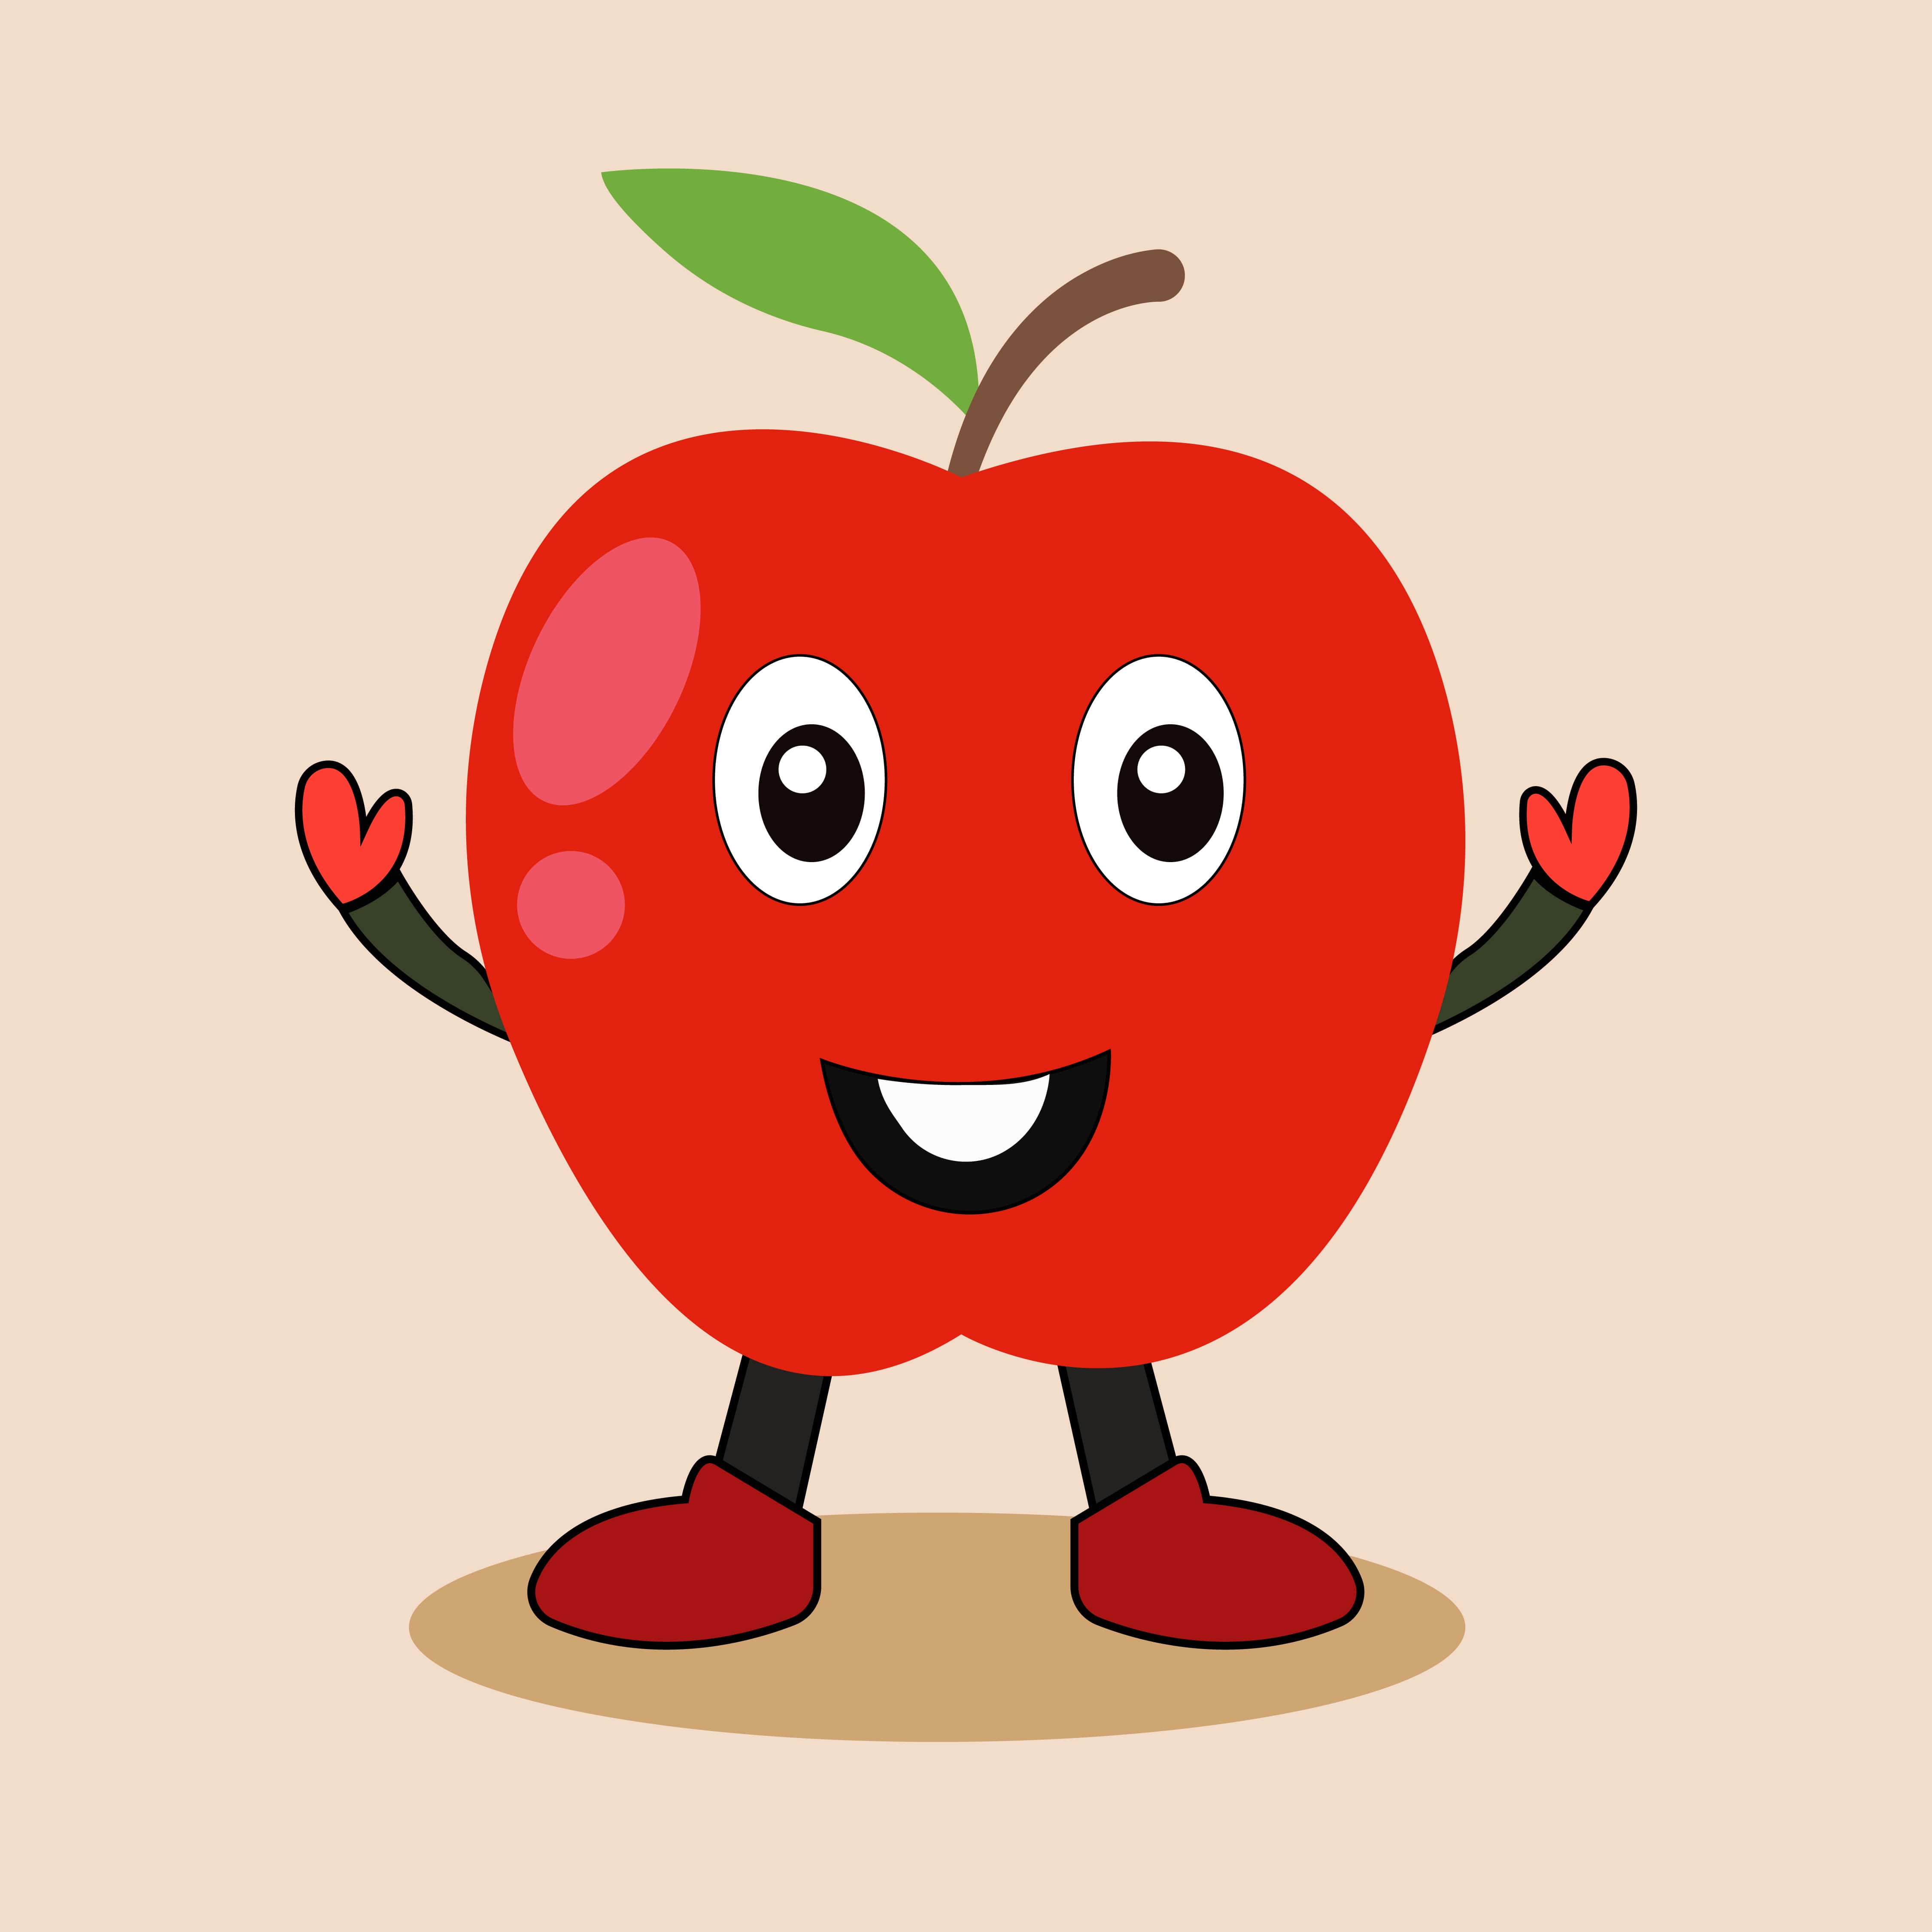 Cute Apple Cartoon Illustration preview image.